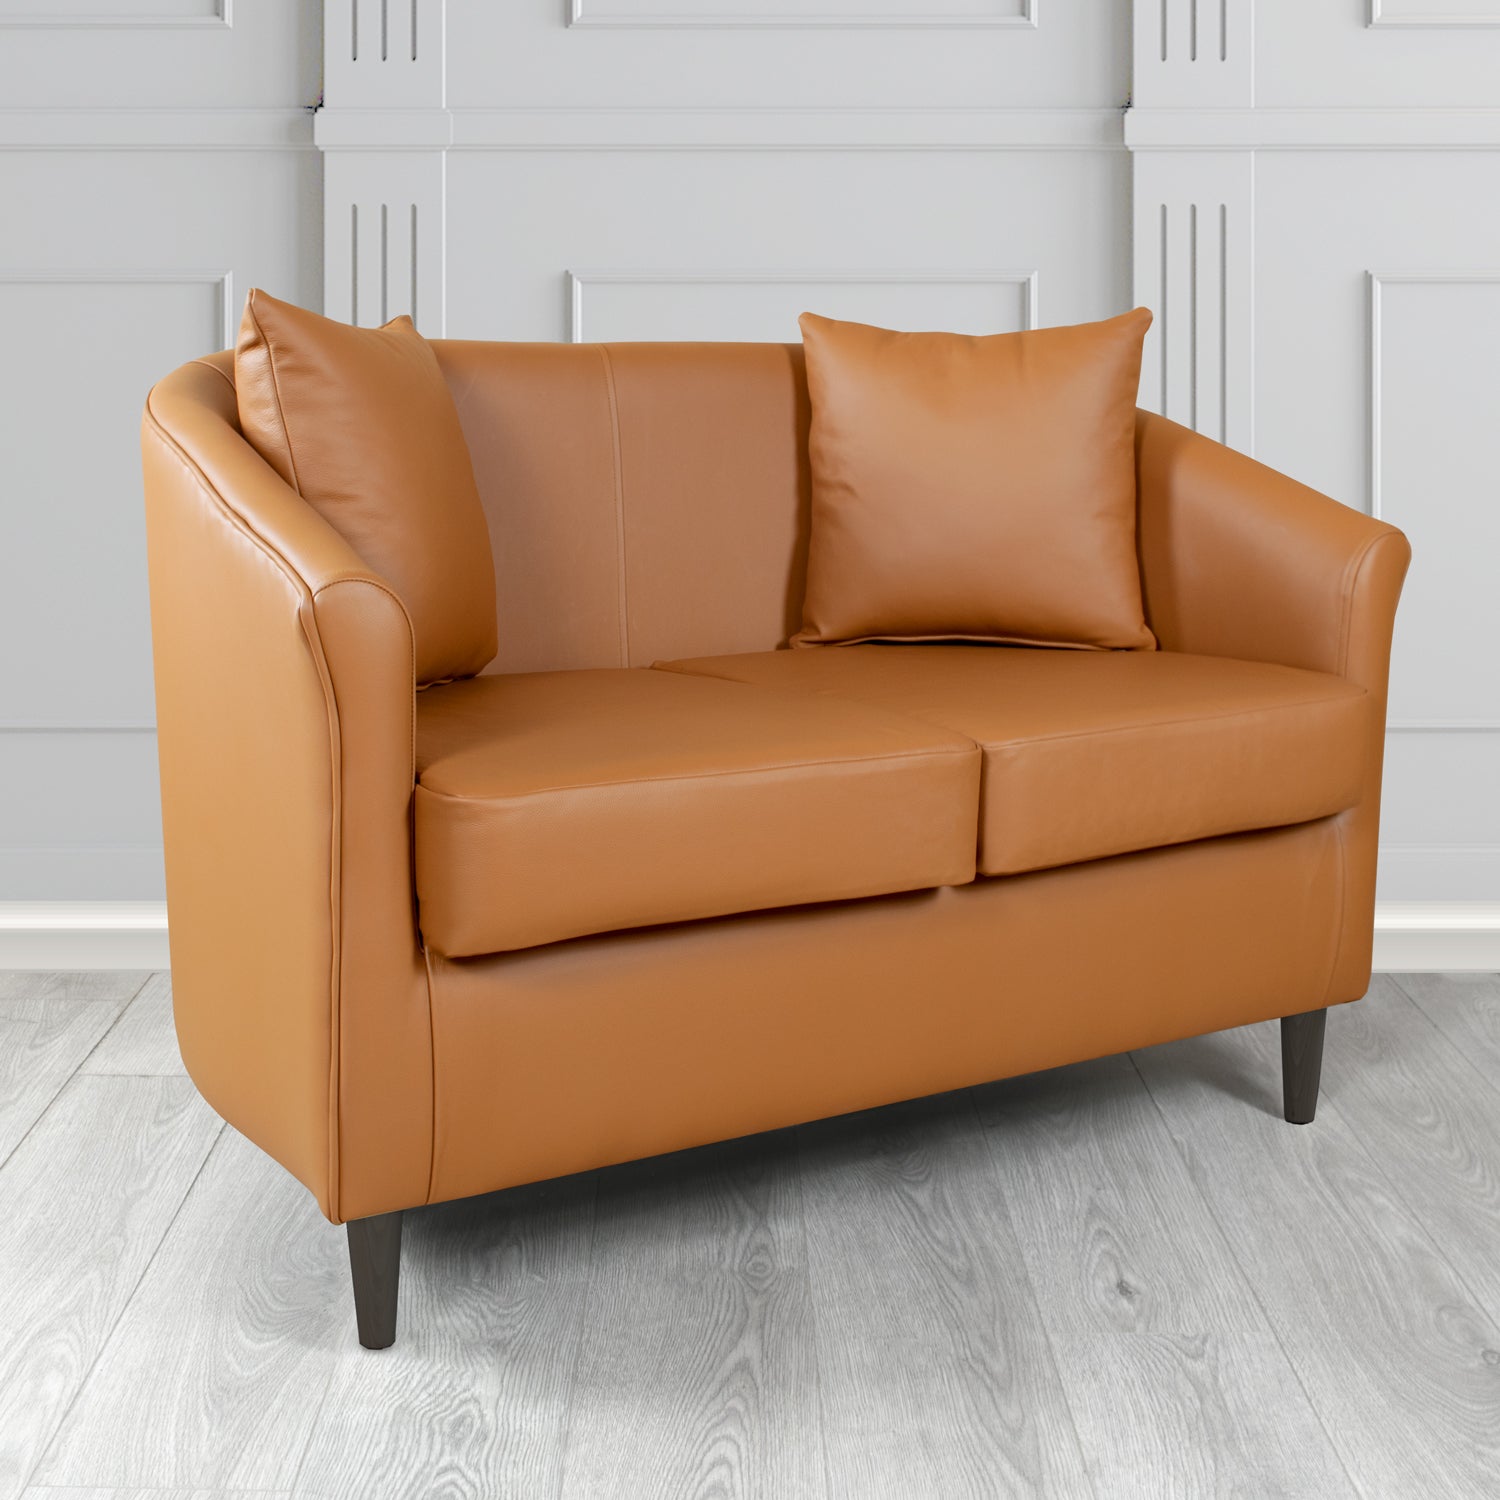 St Tropez Shelly Saddle Crib 5 Genuine Leather 2 Seater Tub Sofa with Scatter Cushions - The Tub Chair Shop